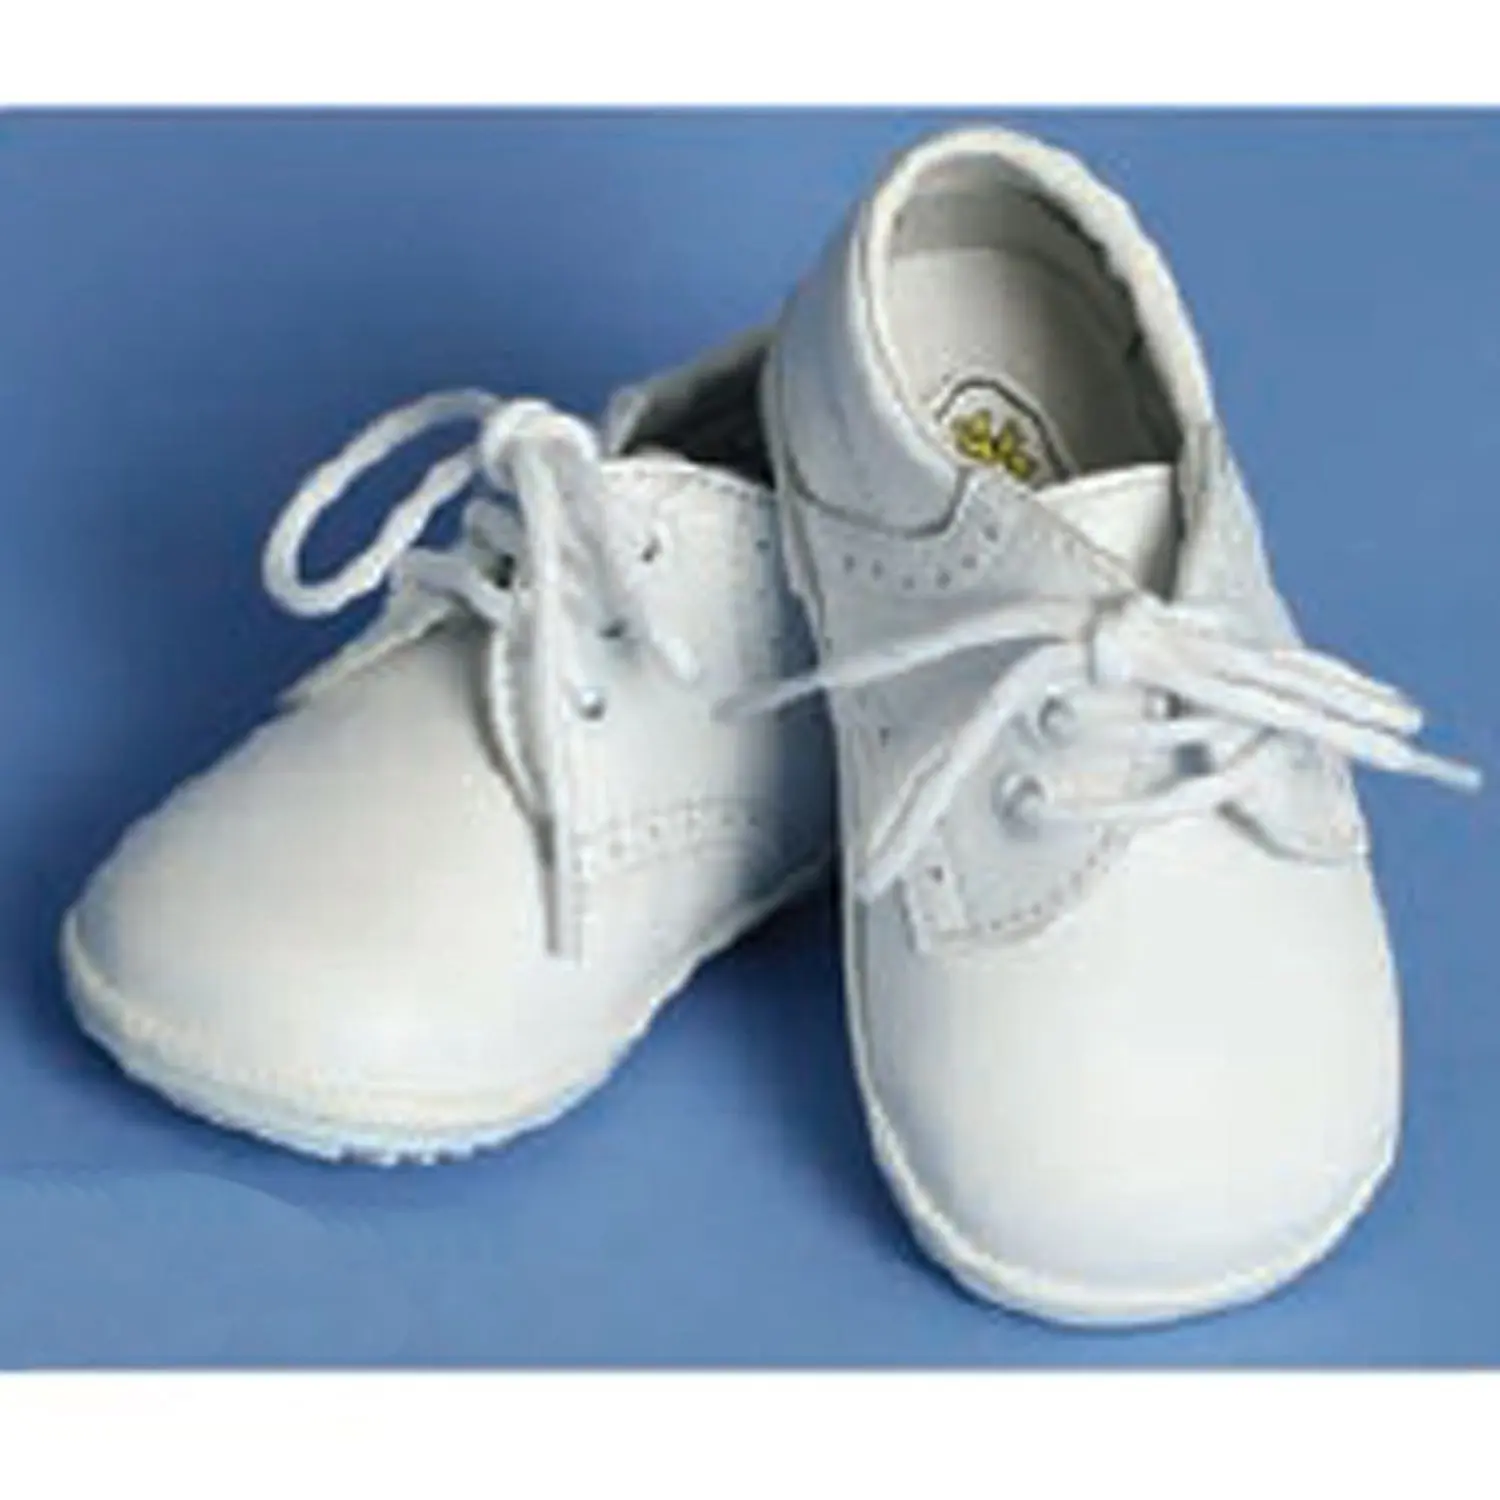 baby boys dress shoes